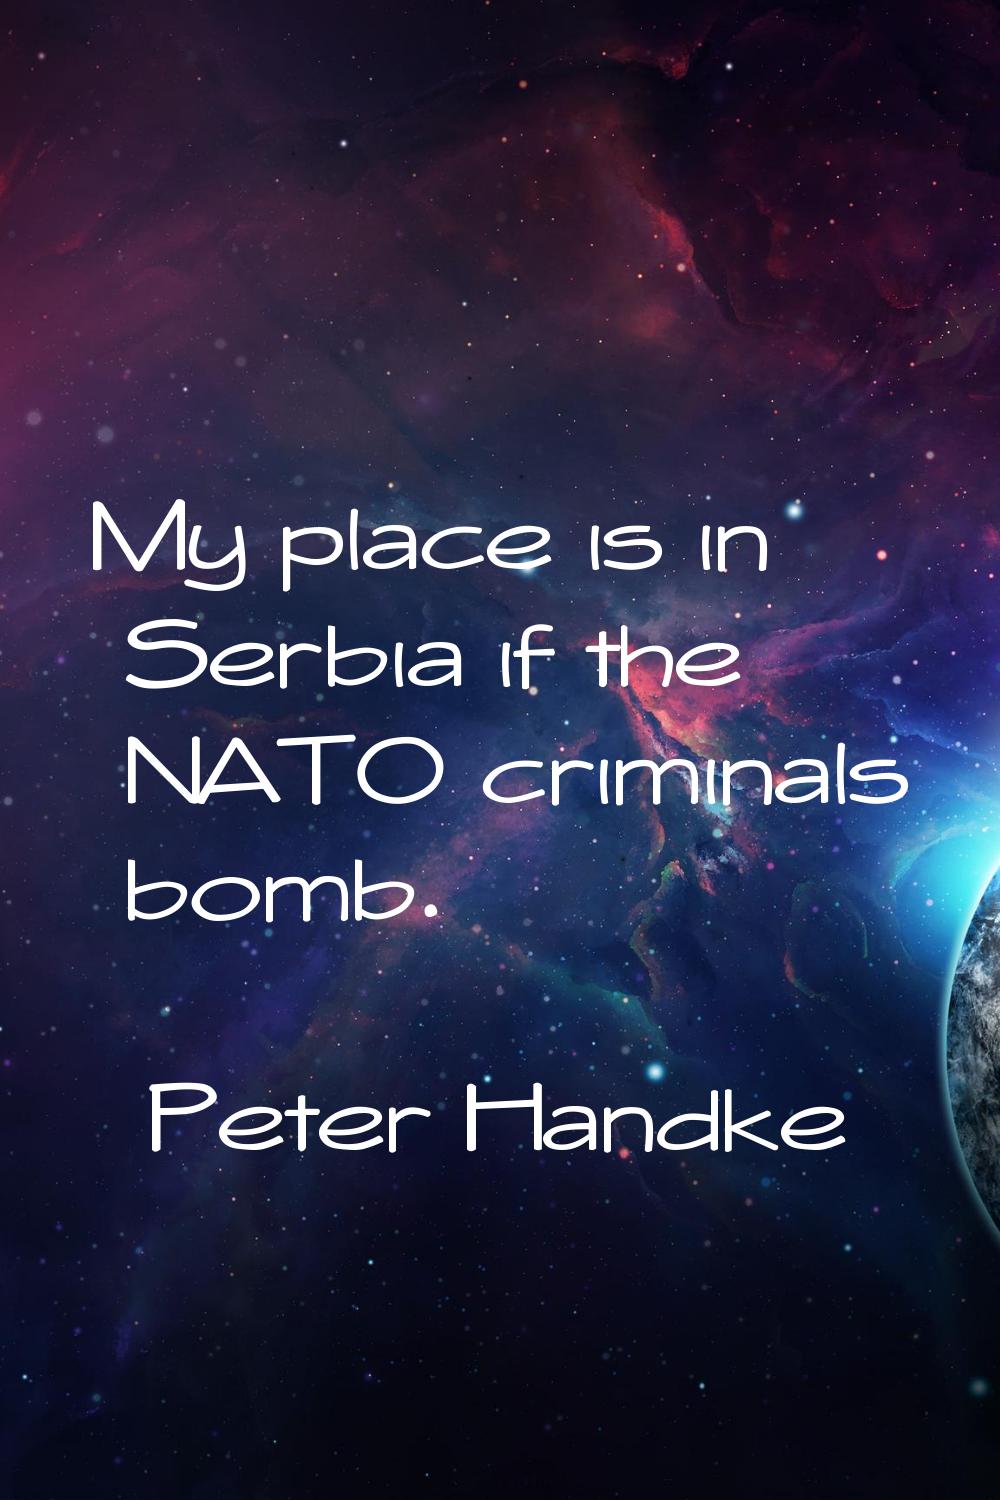 My place is in Serbia if the NATO criminals bomb.